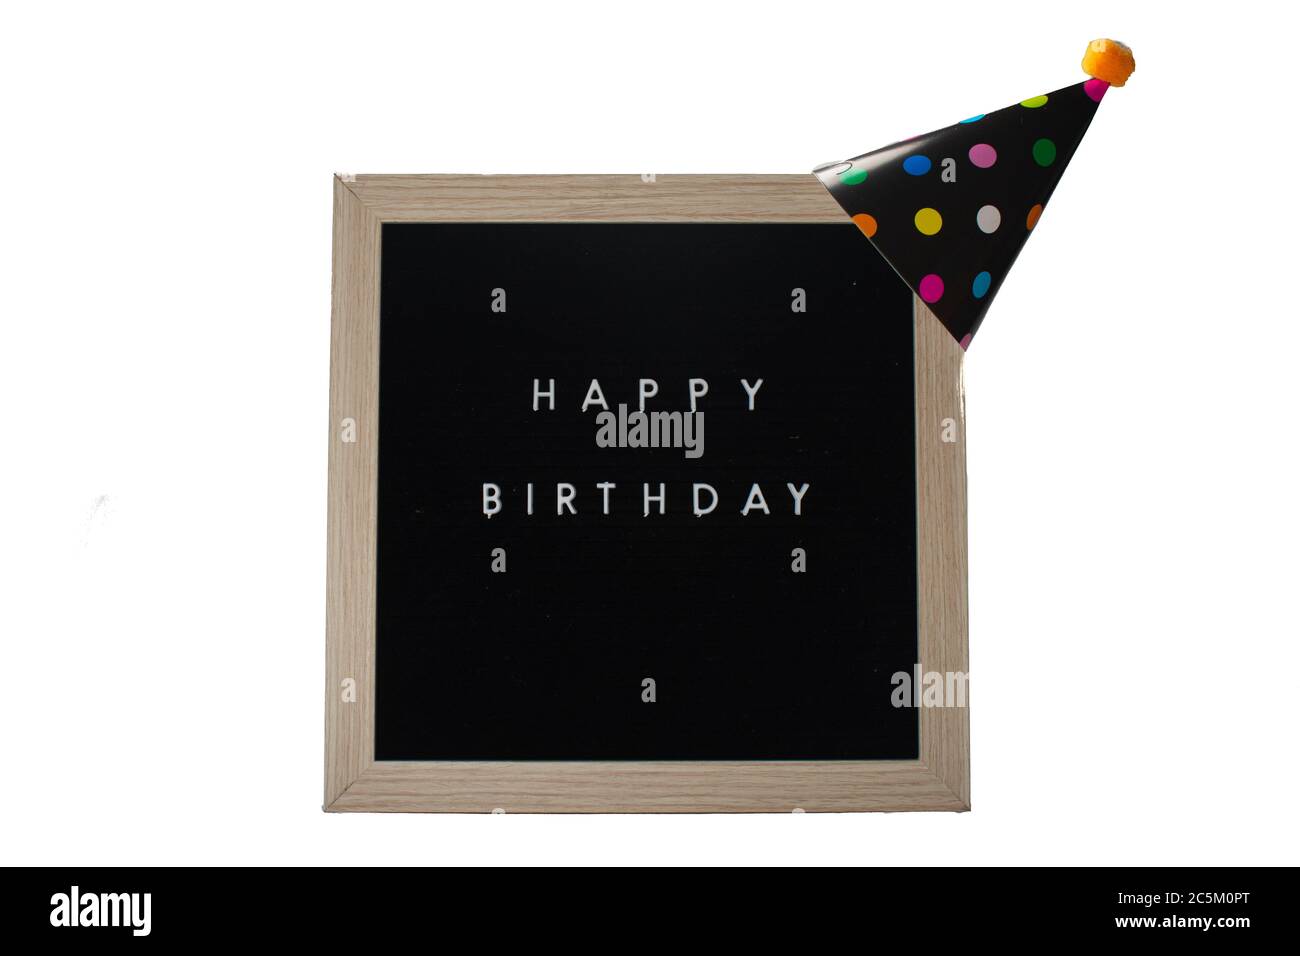 A Black Sign With a Birch Frame That Says Happy Birthday With a Black Polka-Dotted Birthday Hat and an Orange Cotton Ball on Top on a Pure White Backg Stock Photo